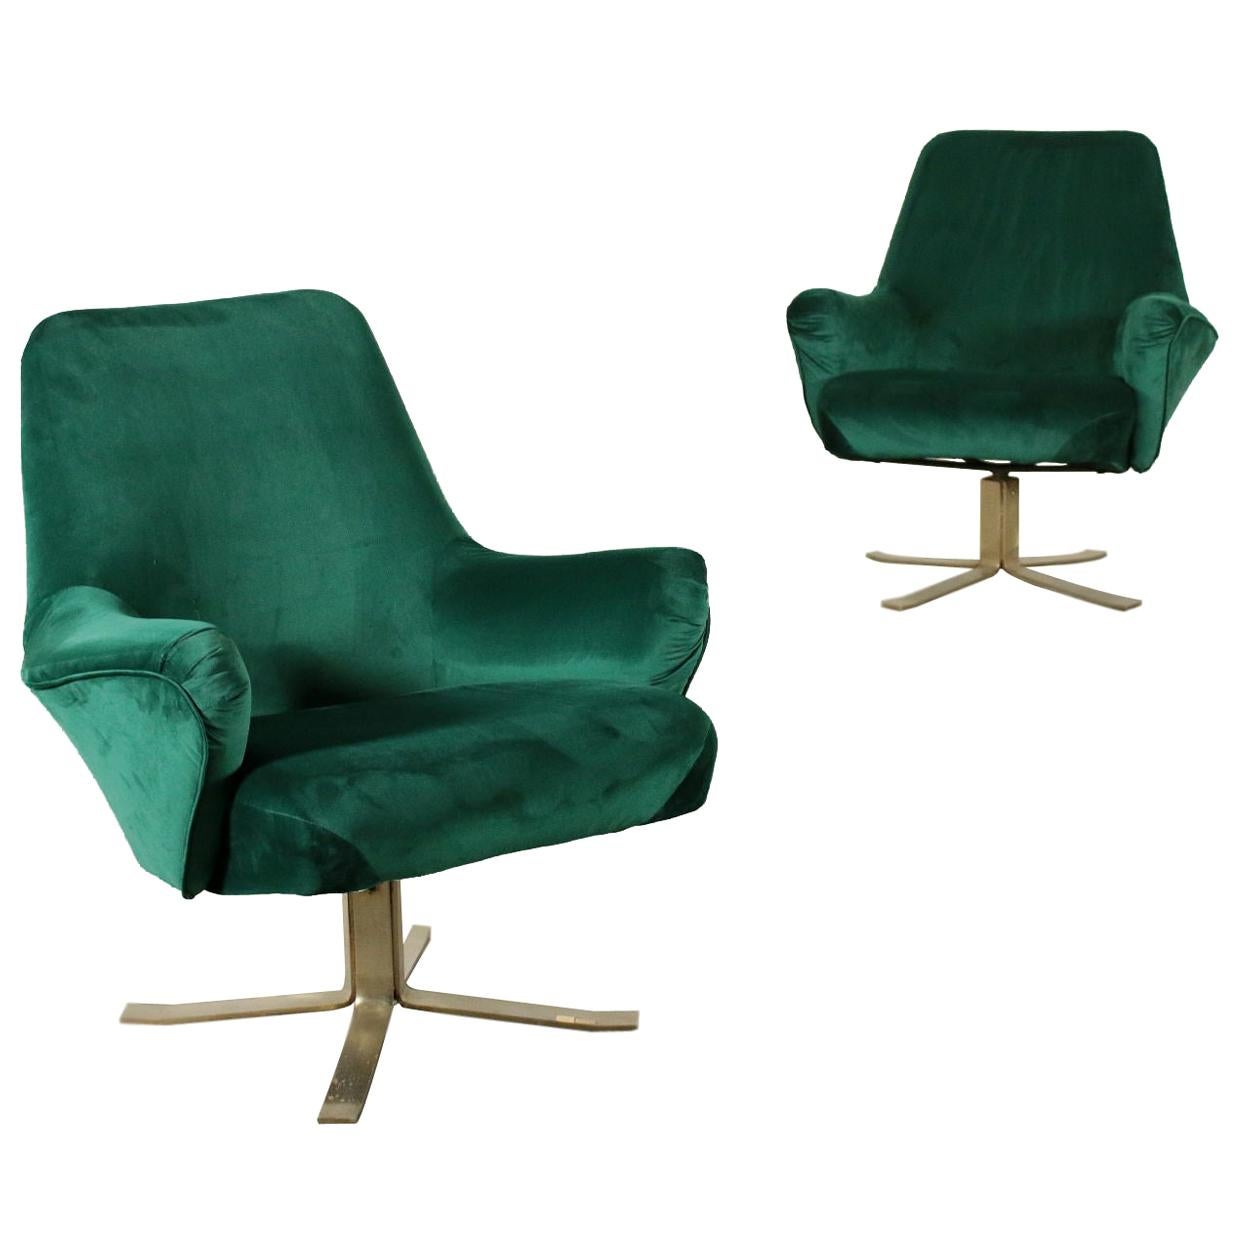 Pair of Armchairs for Formanova Vintage, Italy, 1960s-1970s